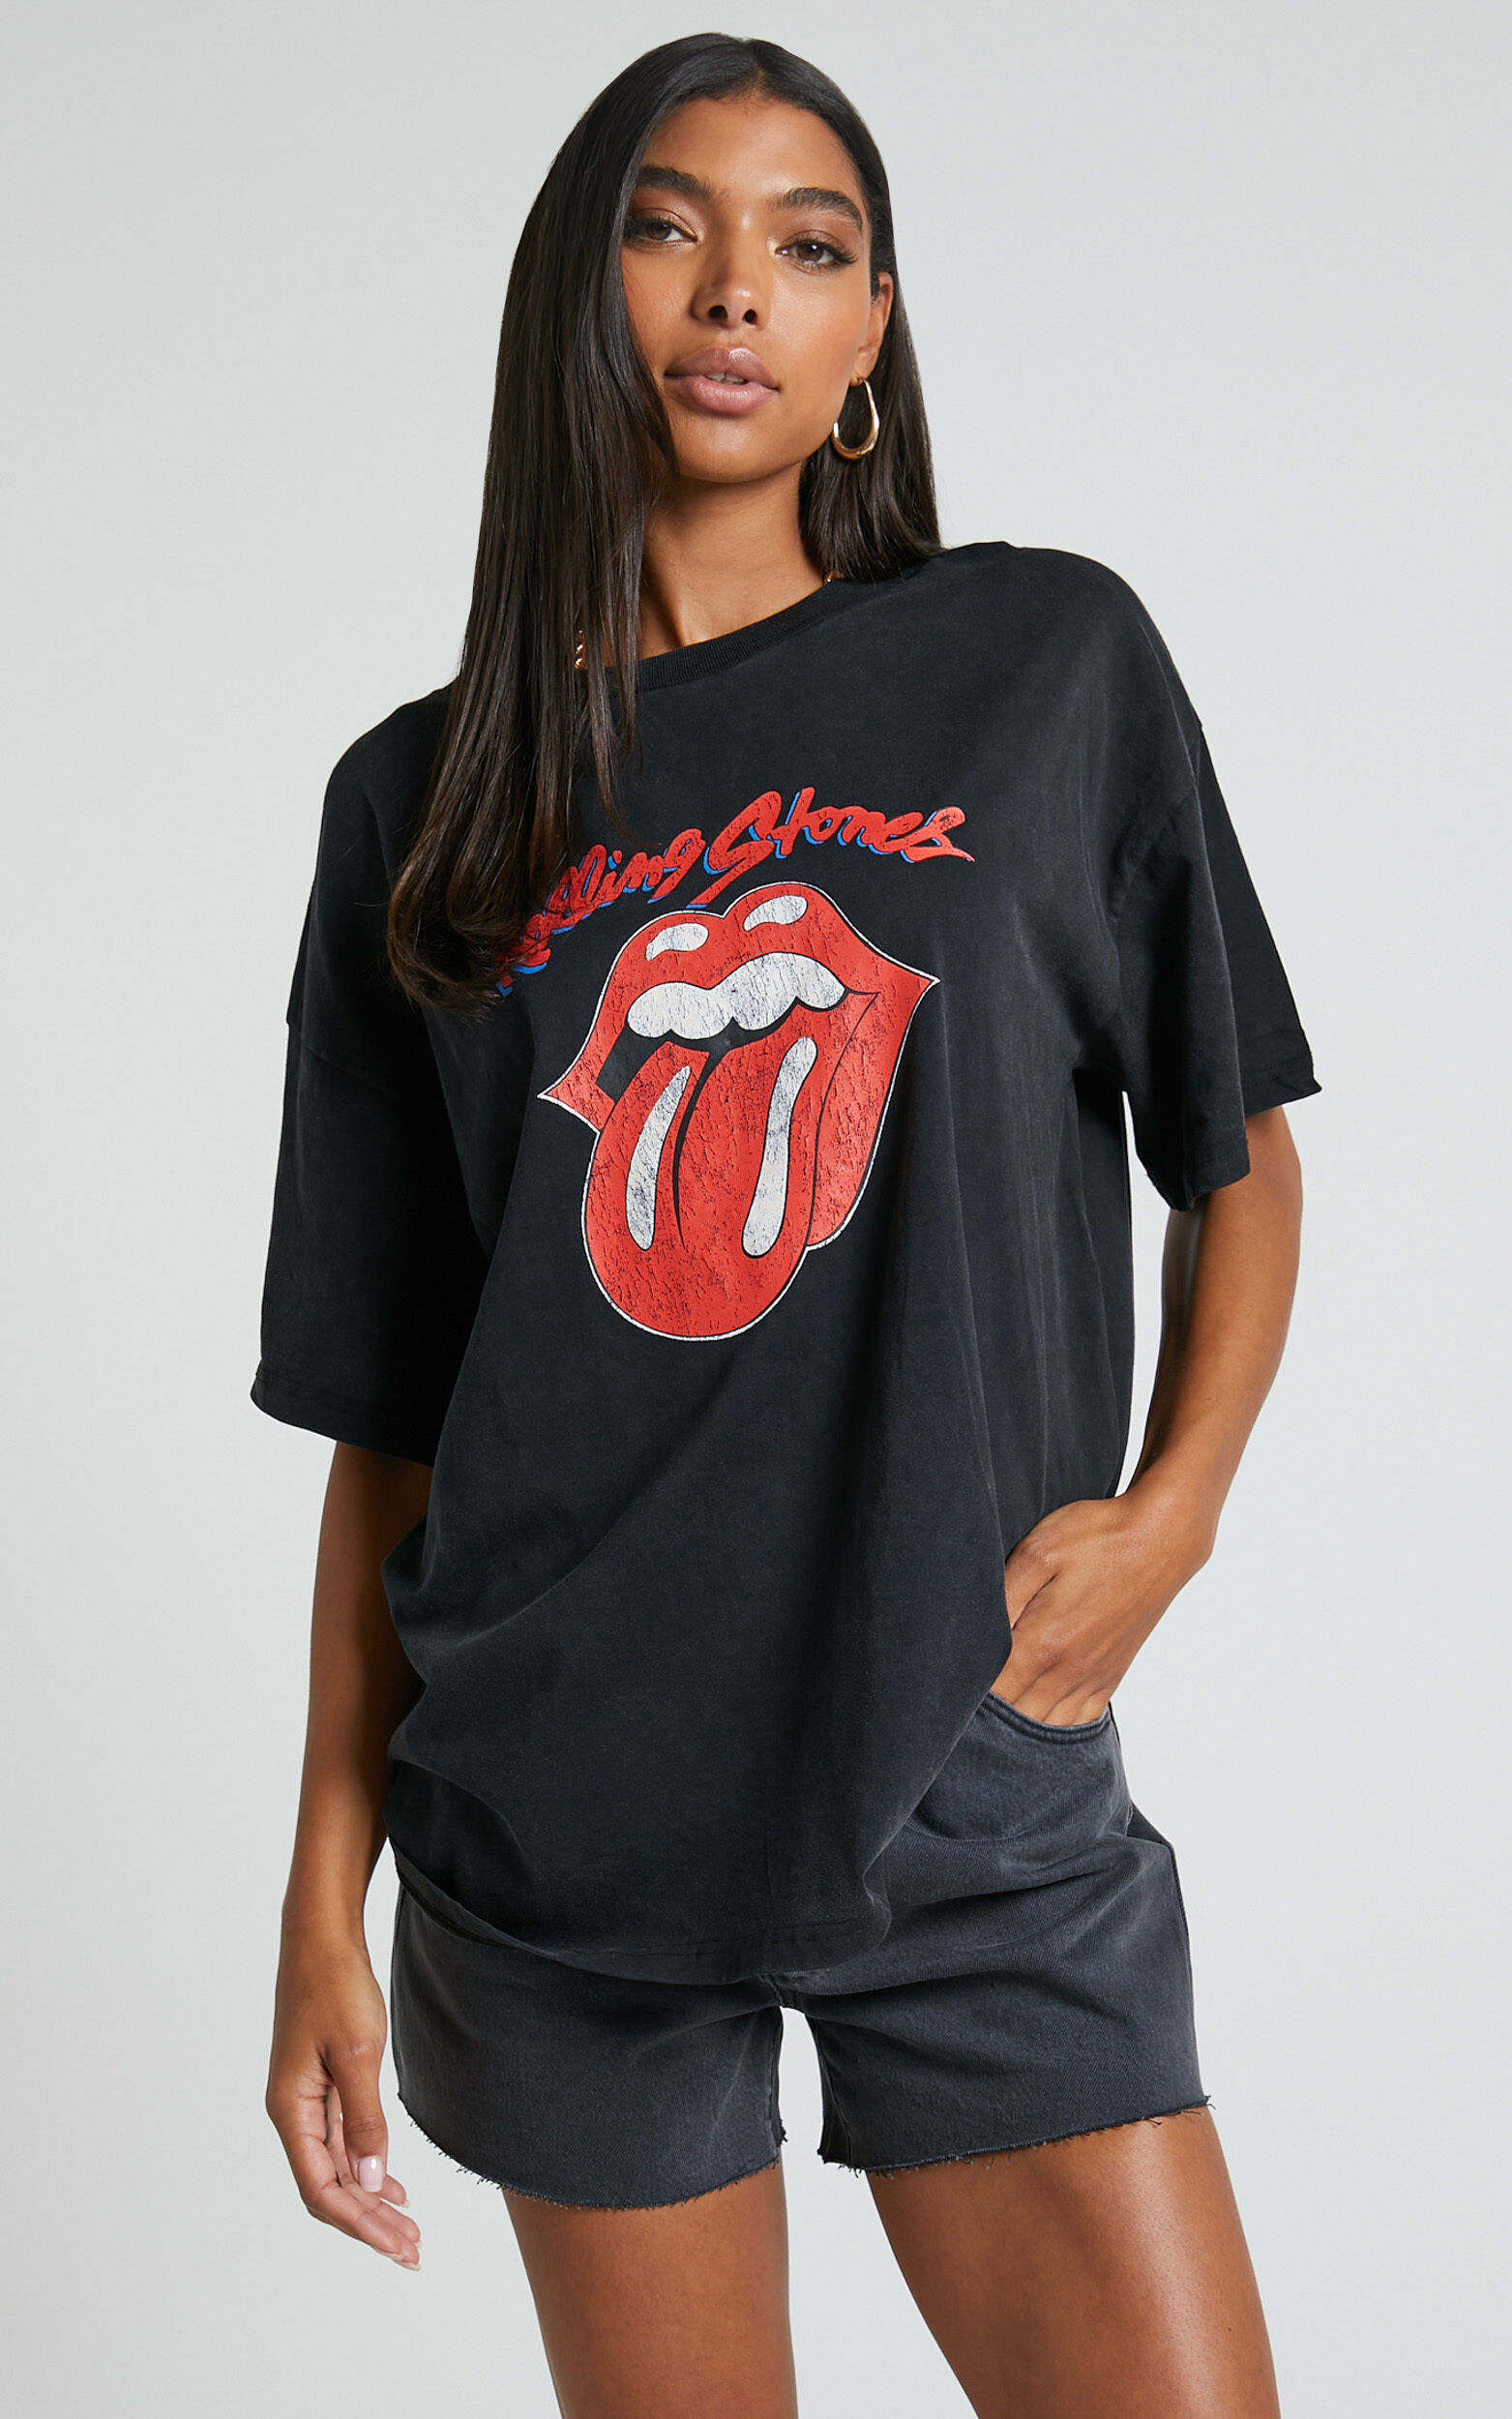 Universal Music - Rolling Stones Tee in Washed Black - M/L, BLK1, super-hi-res image number null